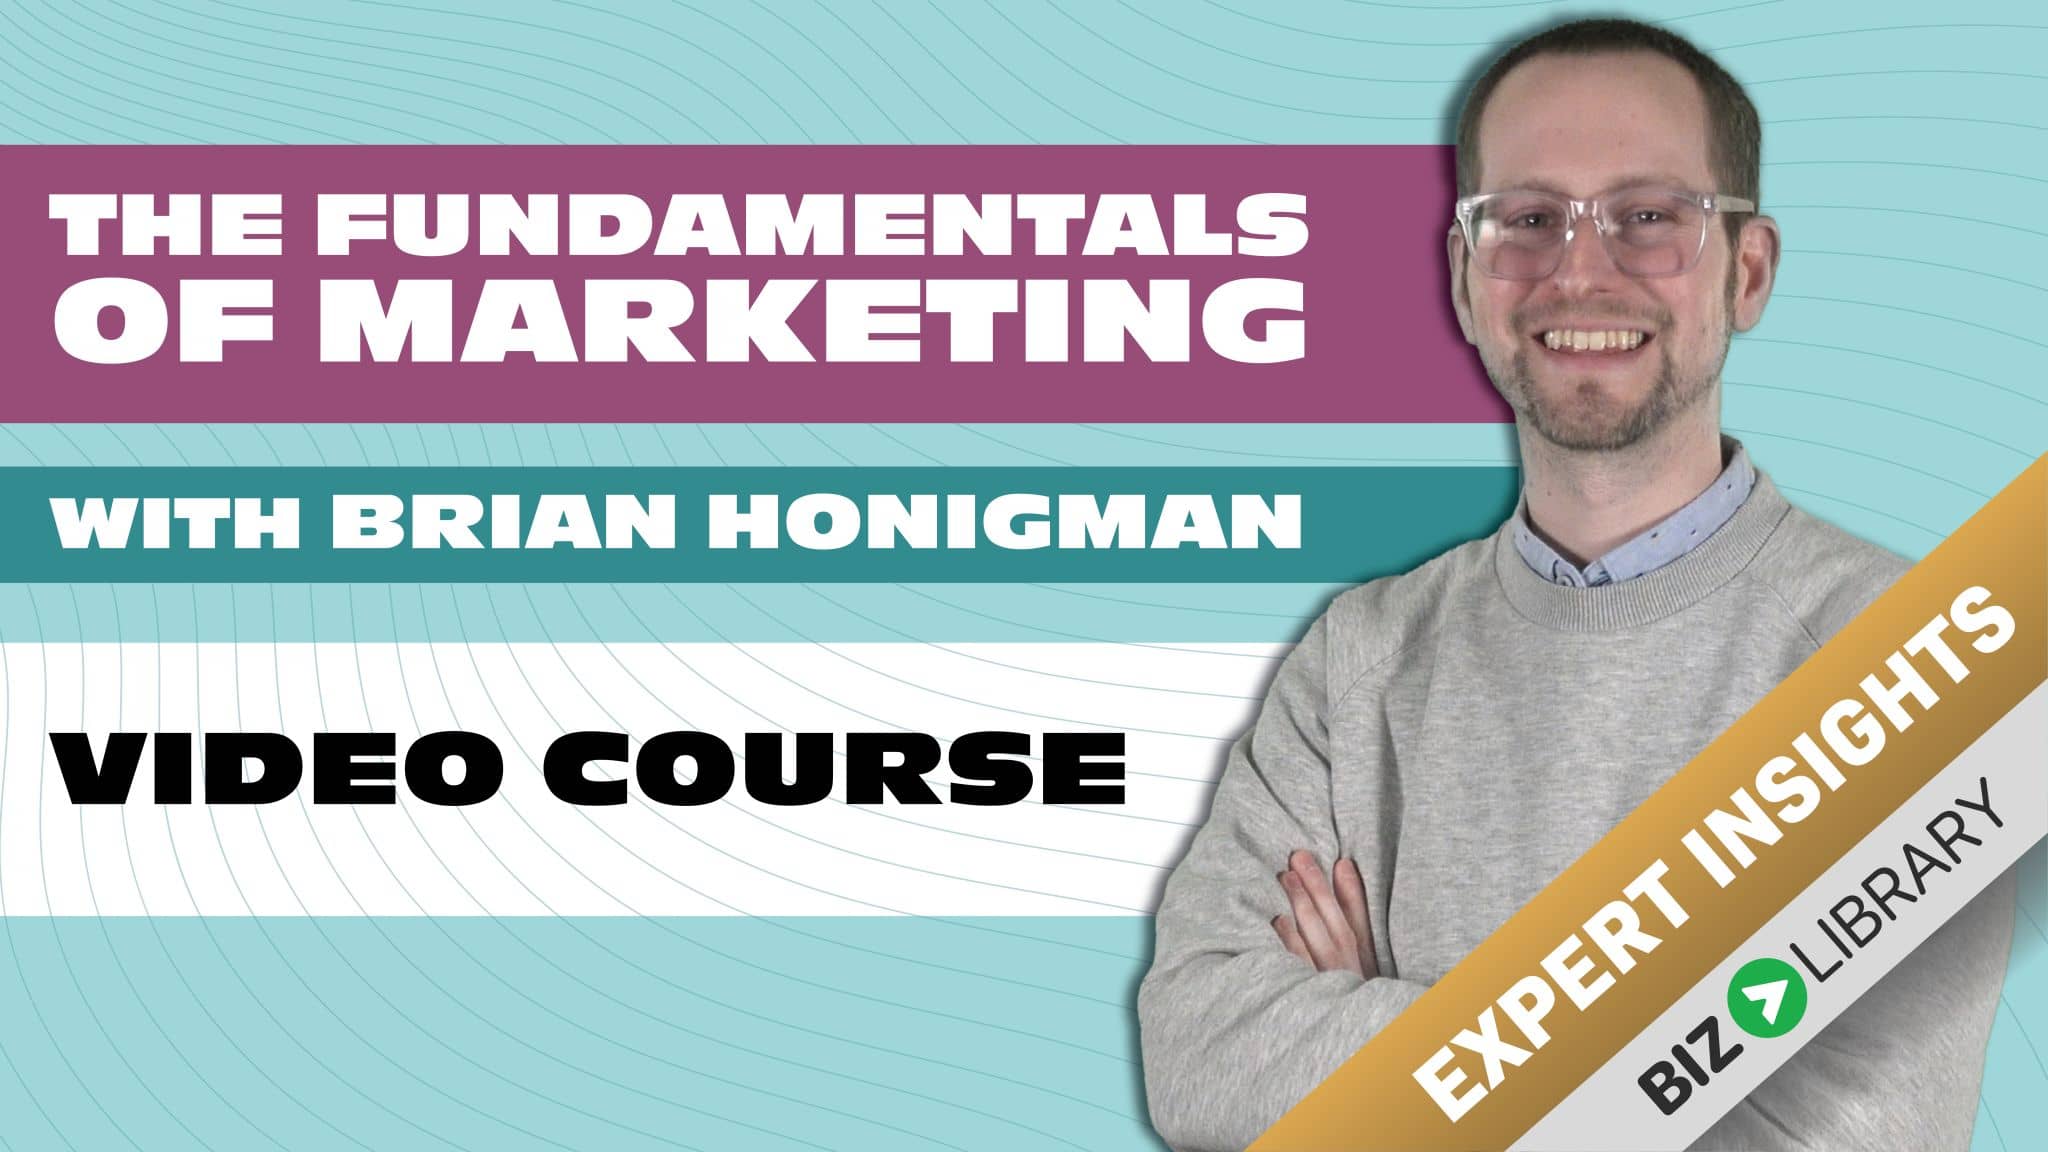 The Fundamentals of Marketing Course